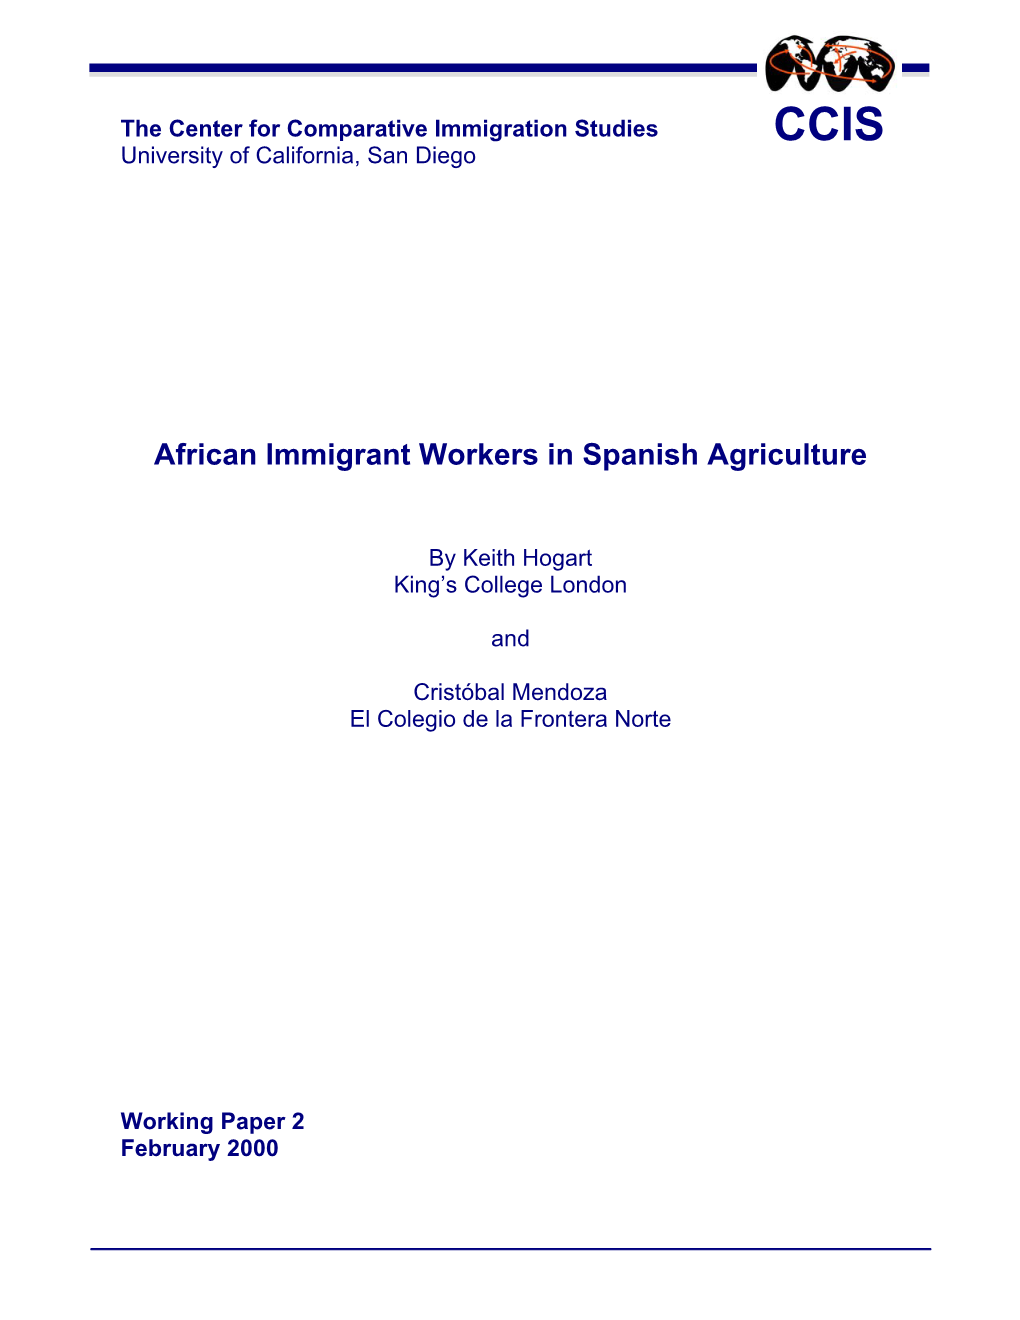 African Immigrant Workers in Spanish Agriculture